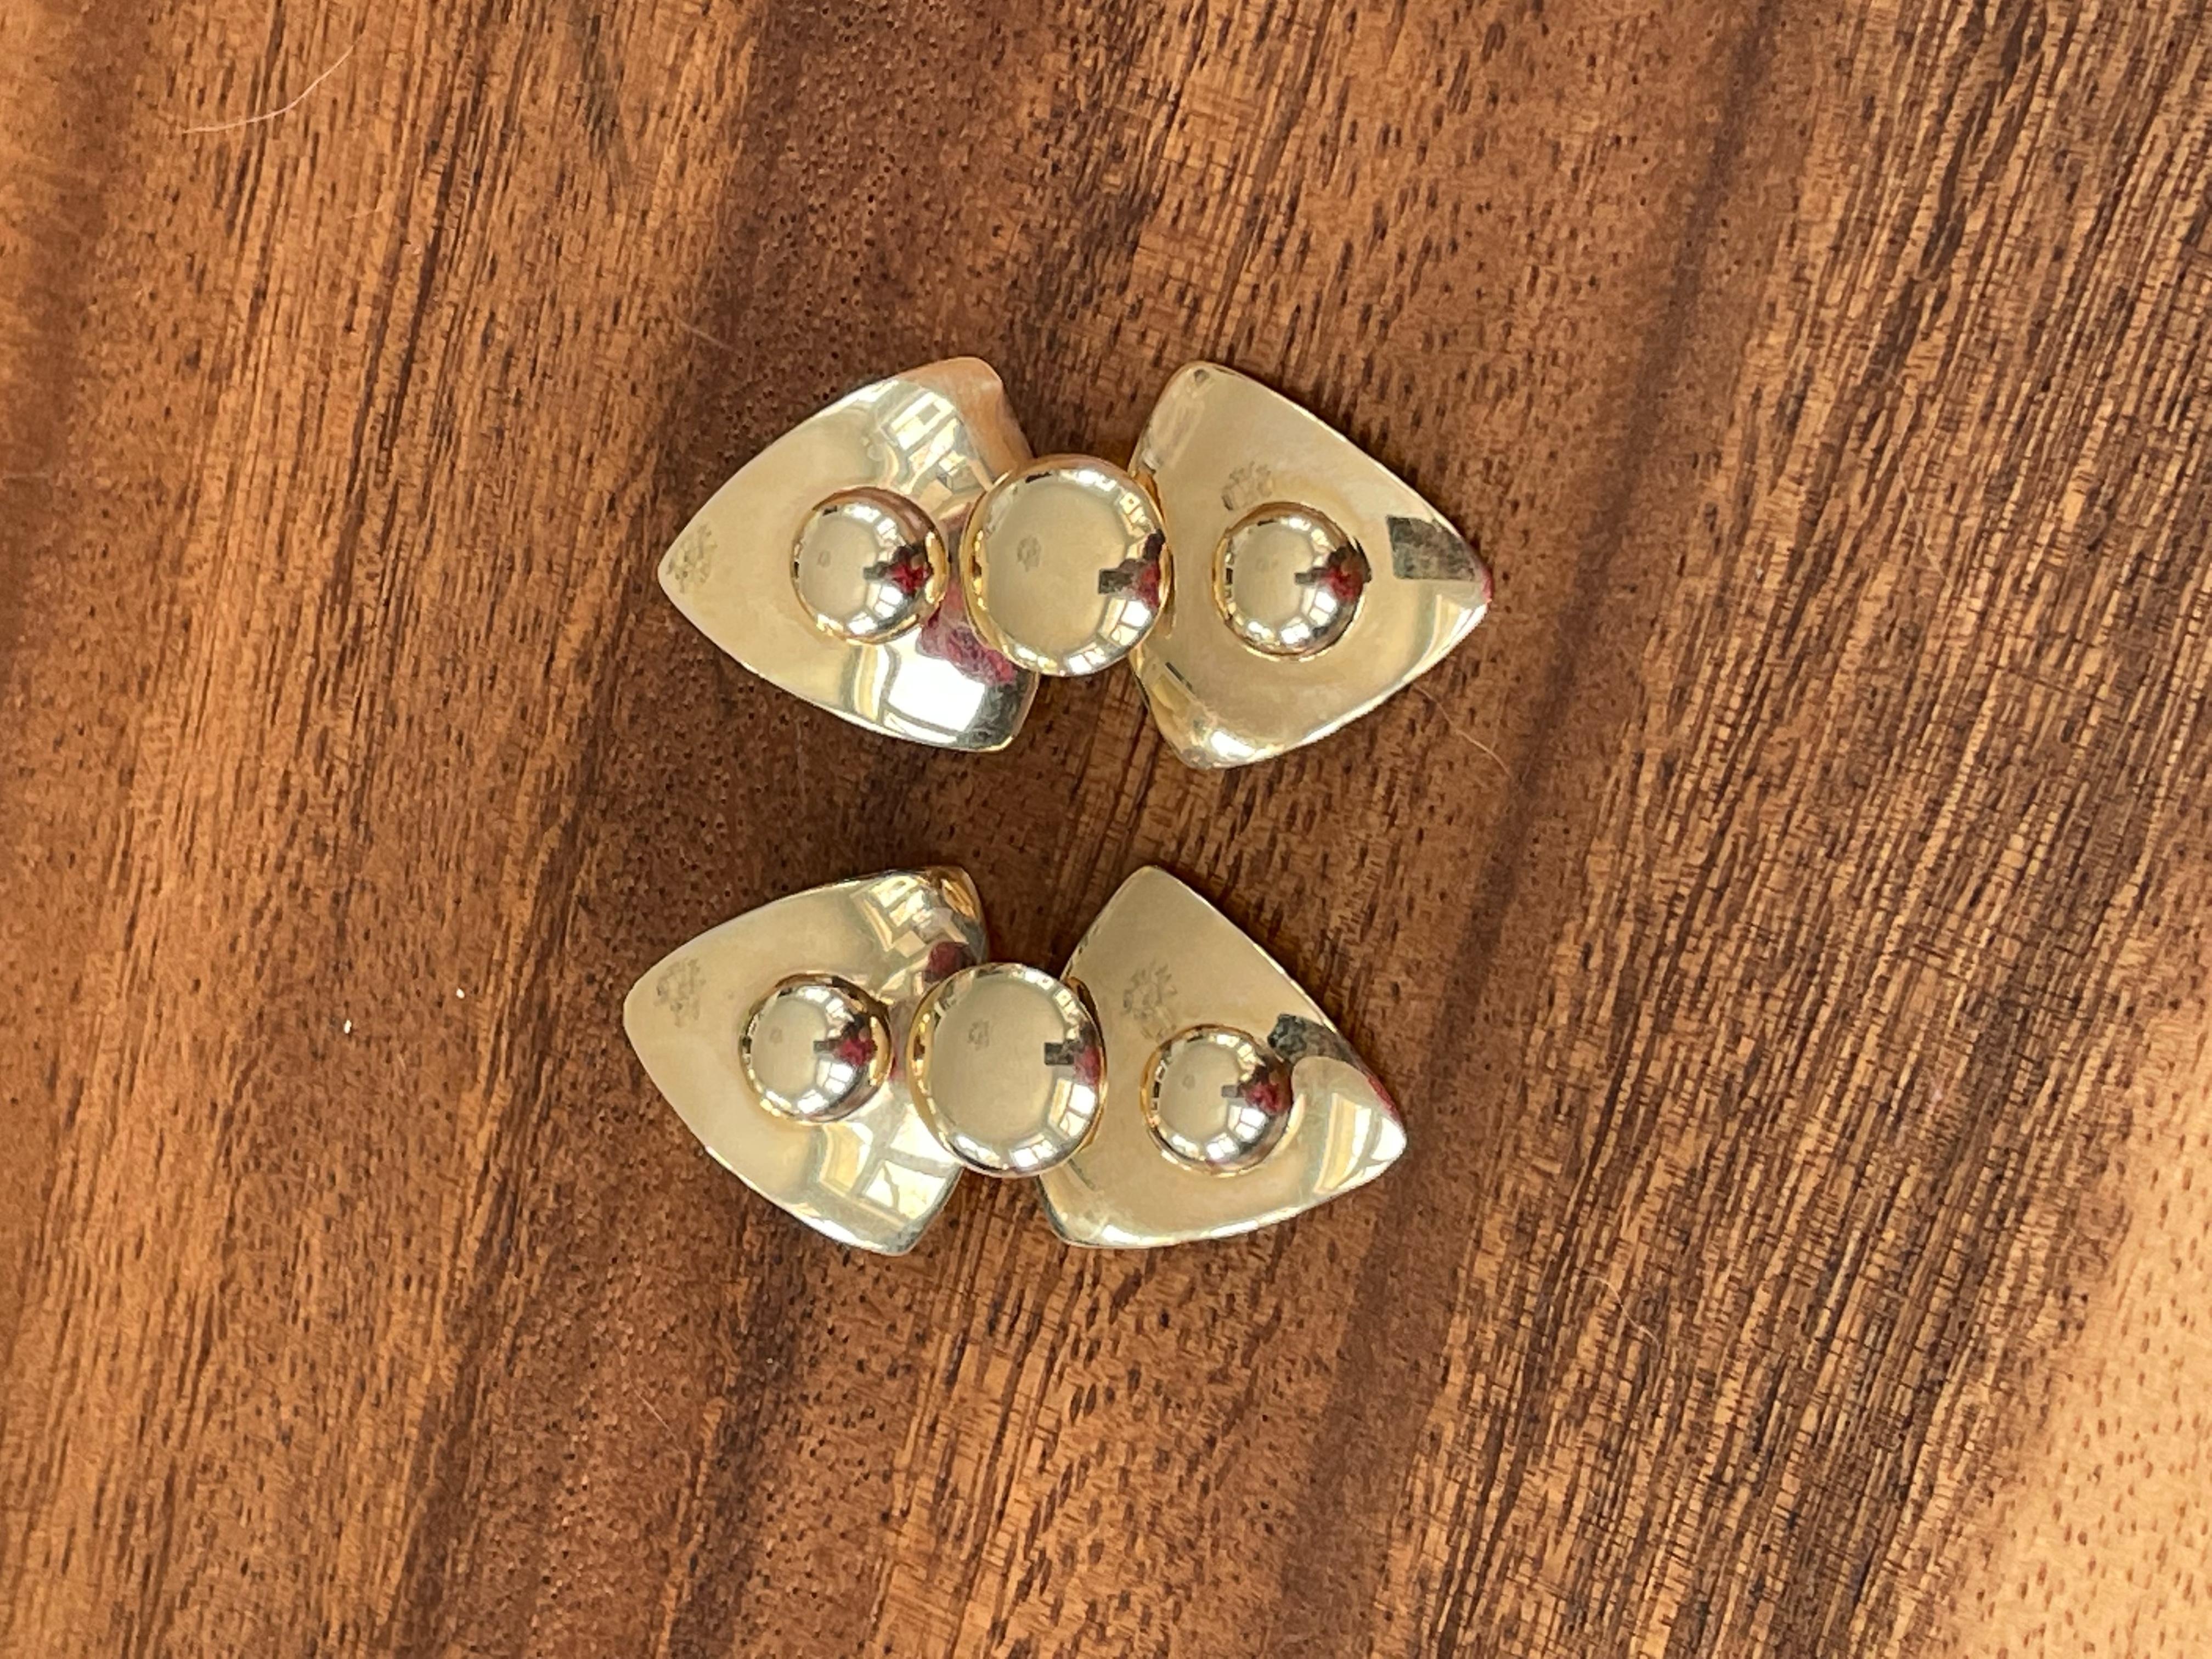 These stamped John Atencio (JA) pierced earrings are of a modern design.  They are 14 karat yellow Gold.  The lower piece is articulating providing for light reflection and an additional eye-catching feature.  

Measurement:  1 3/4